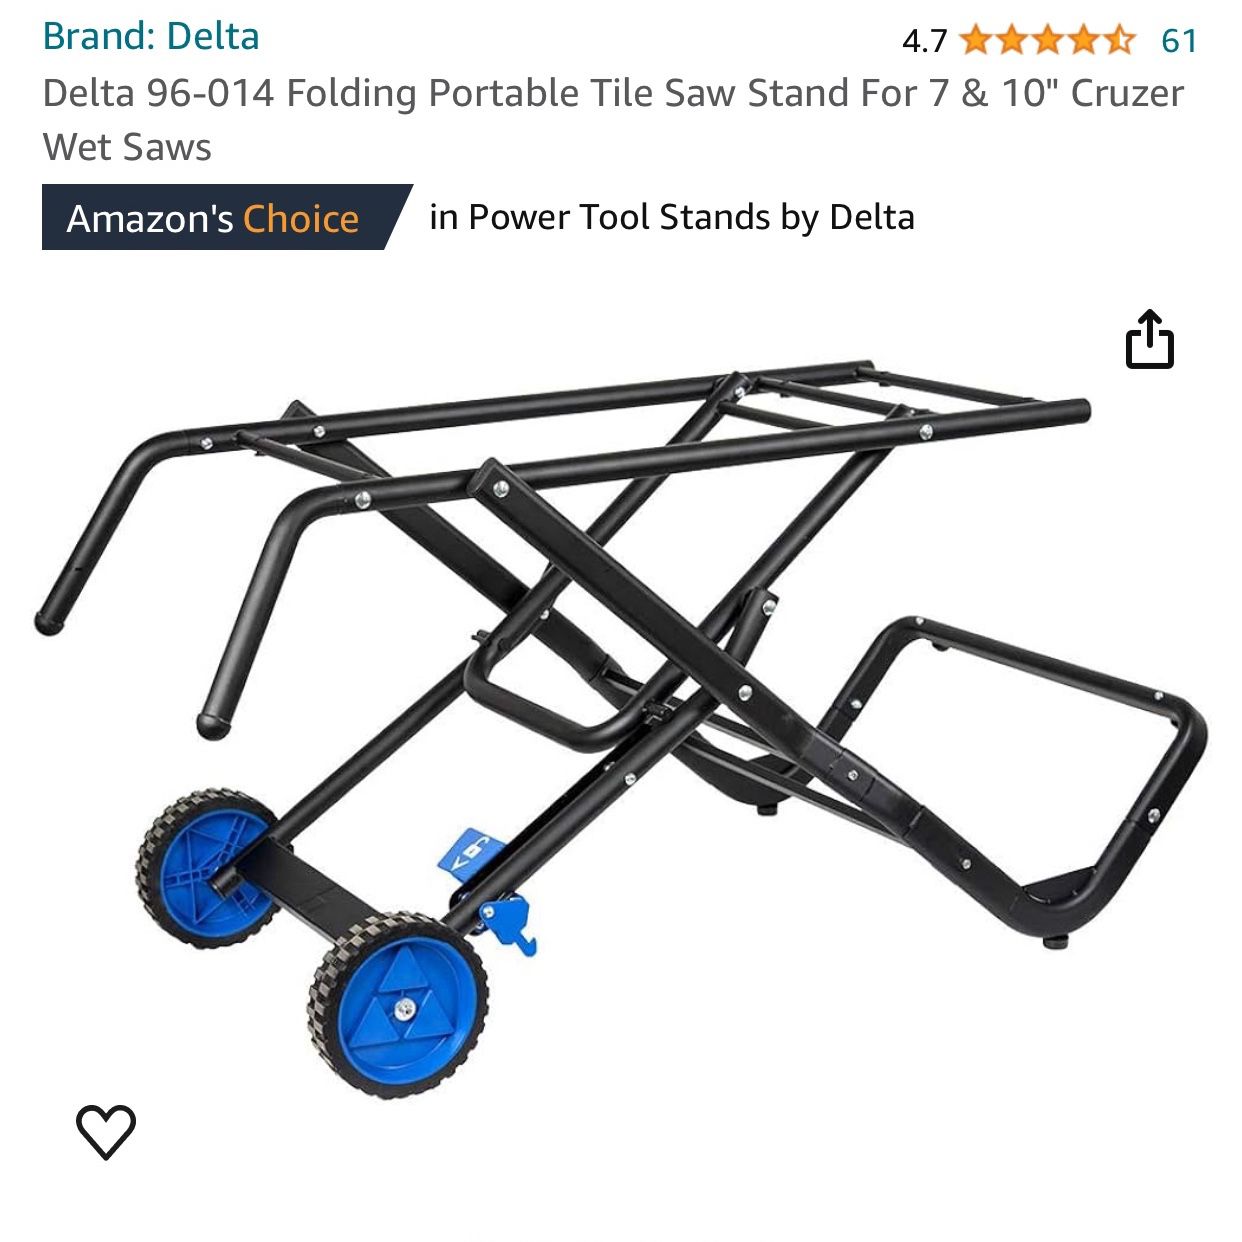 Delta - Folding Portable Tile Saw Stand